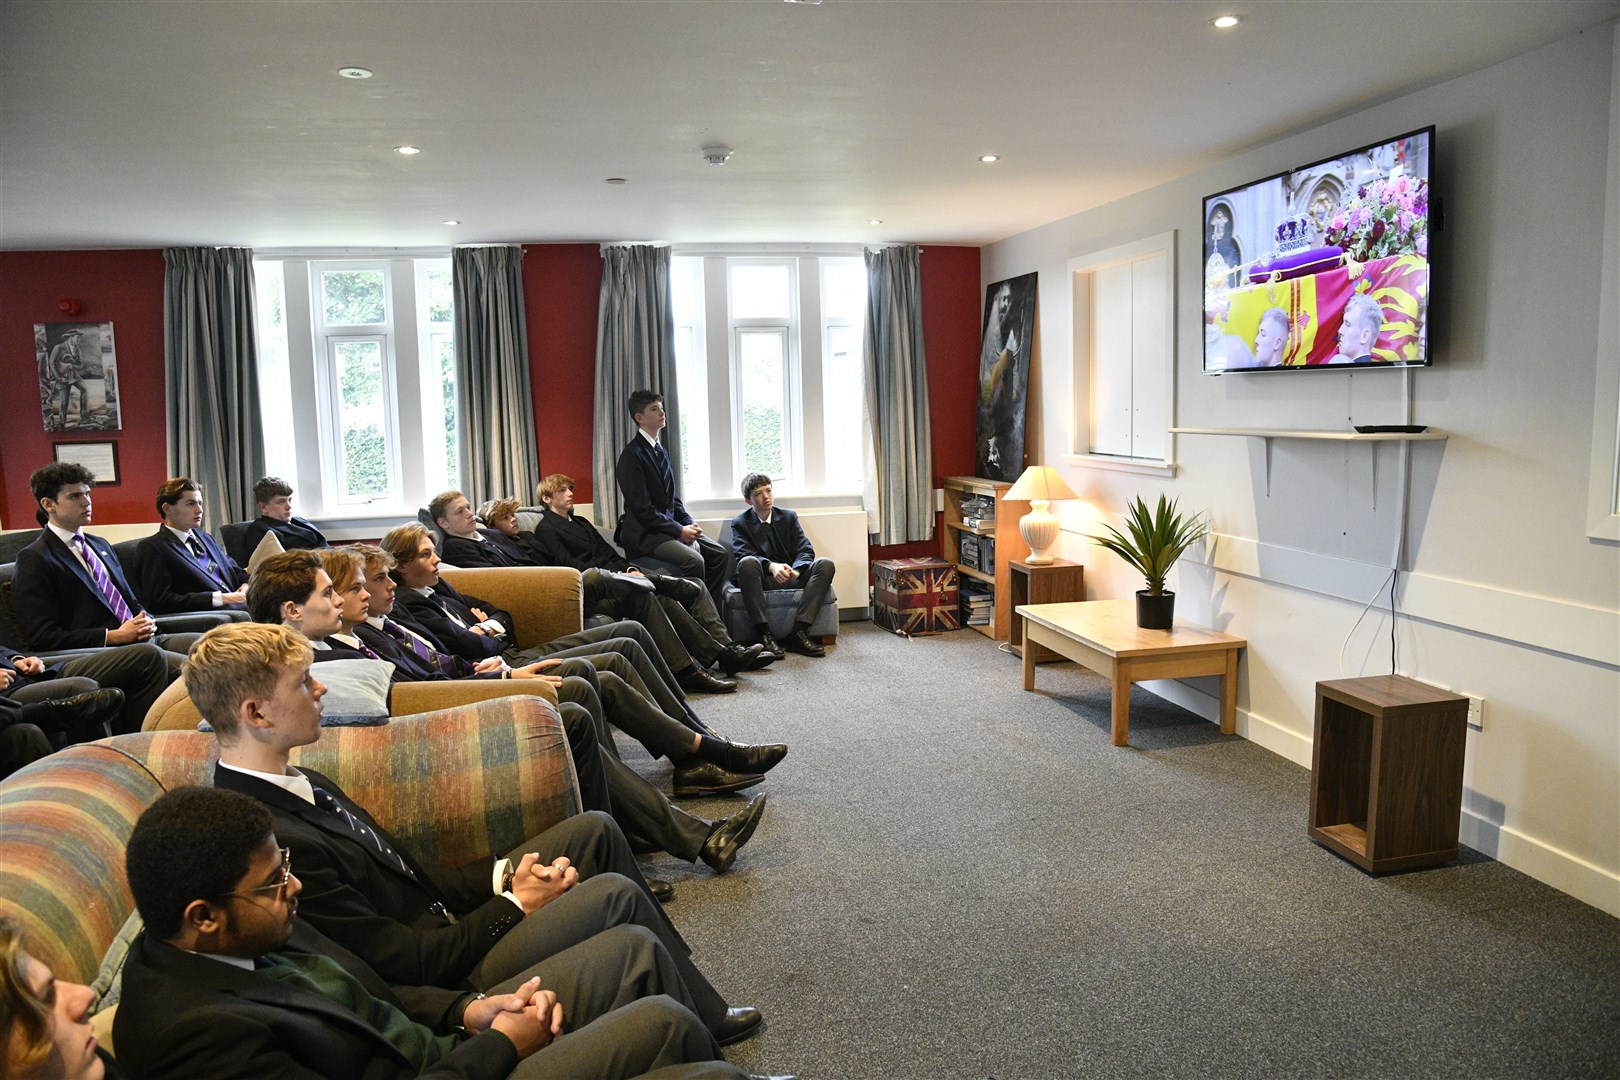 Pupils gathered in their boarding houses to watch the funeral of Queen Elizabeth II. Picture: Daniel Forsyth